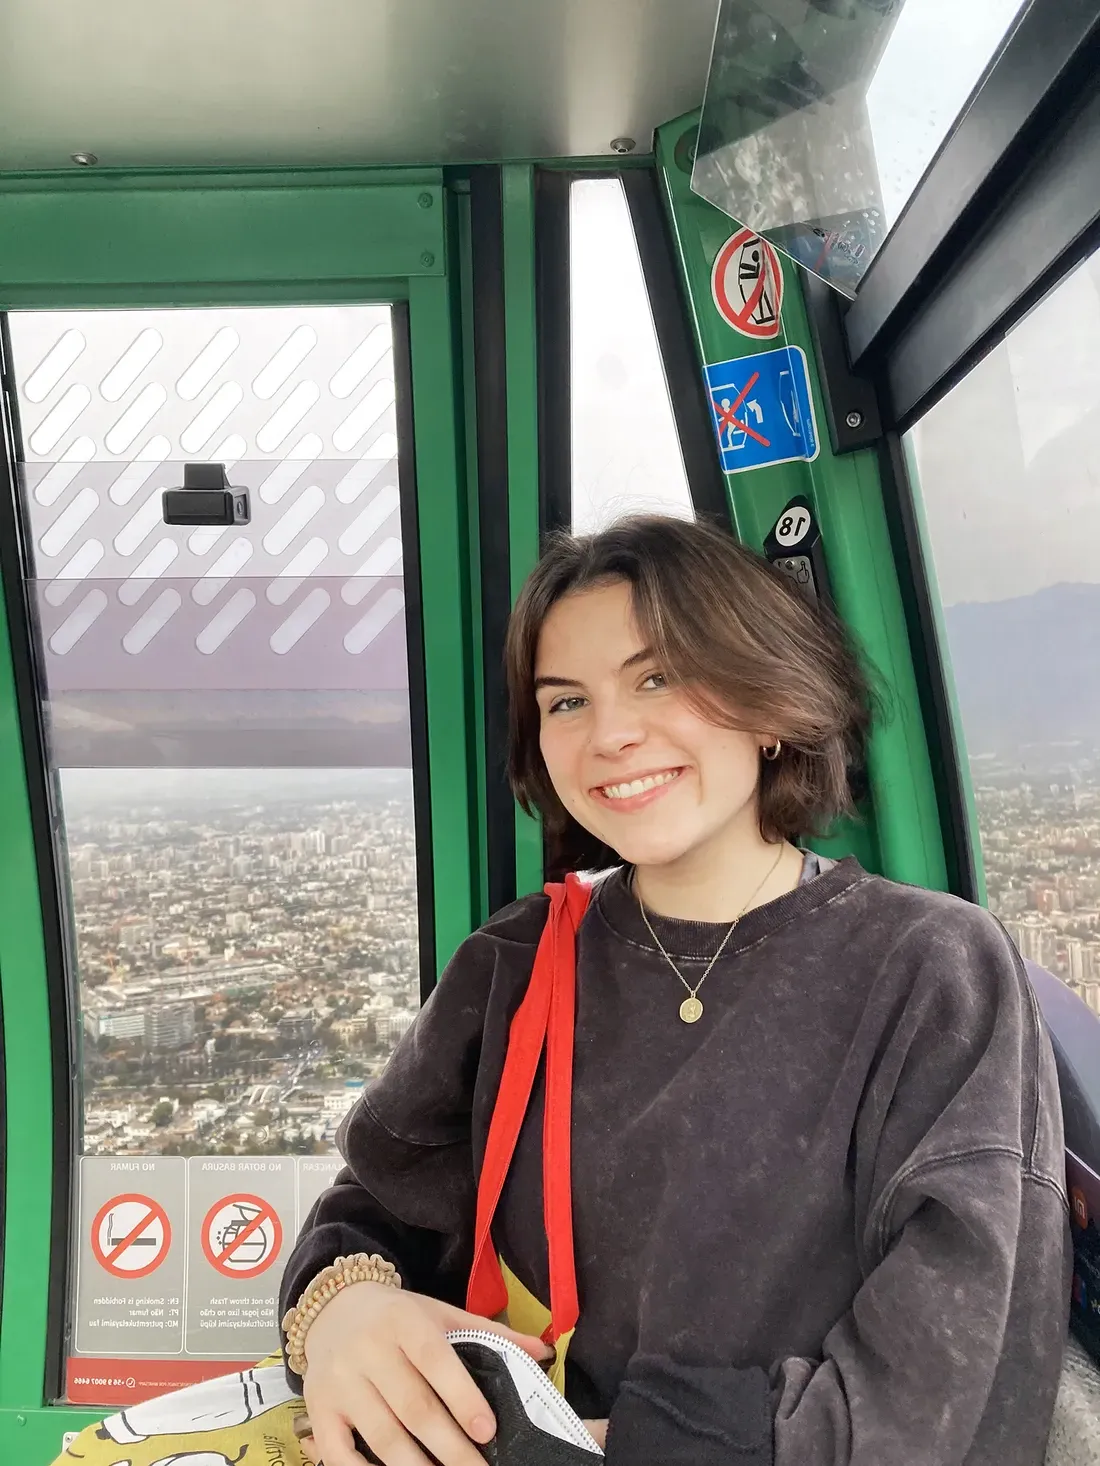 Sophie Clinton poses for a photo inside of a cable car that is in motion up a mountain.